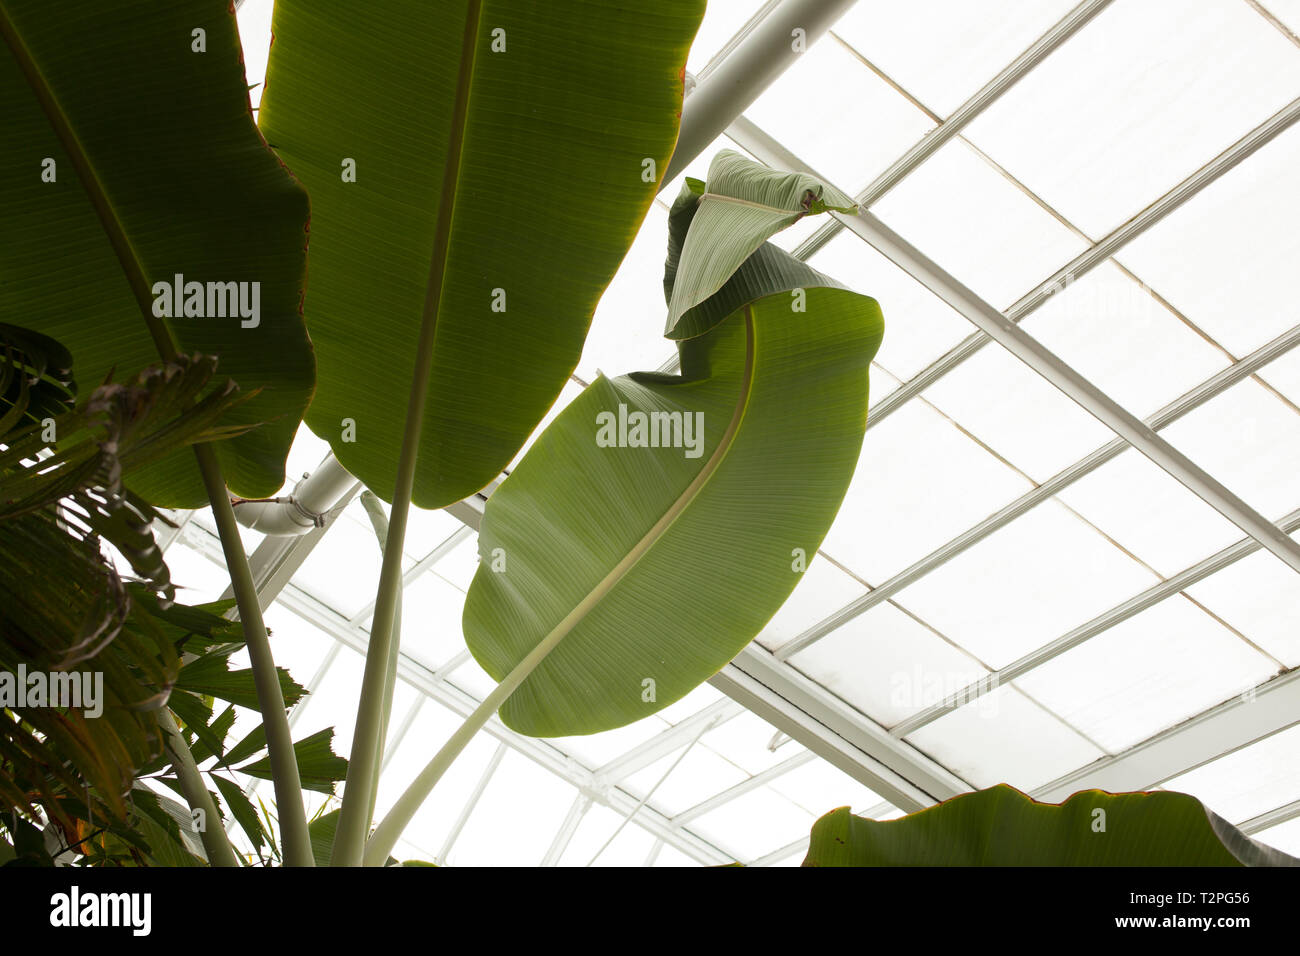 Looking up at banana plant leaves, with one oddly shaped leaf. Stock Photo